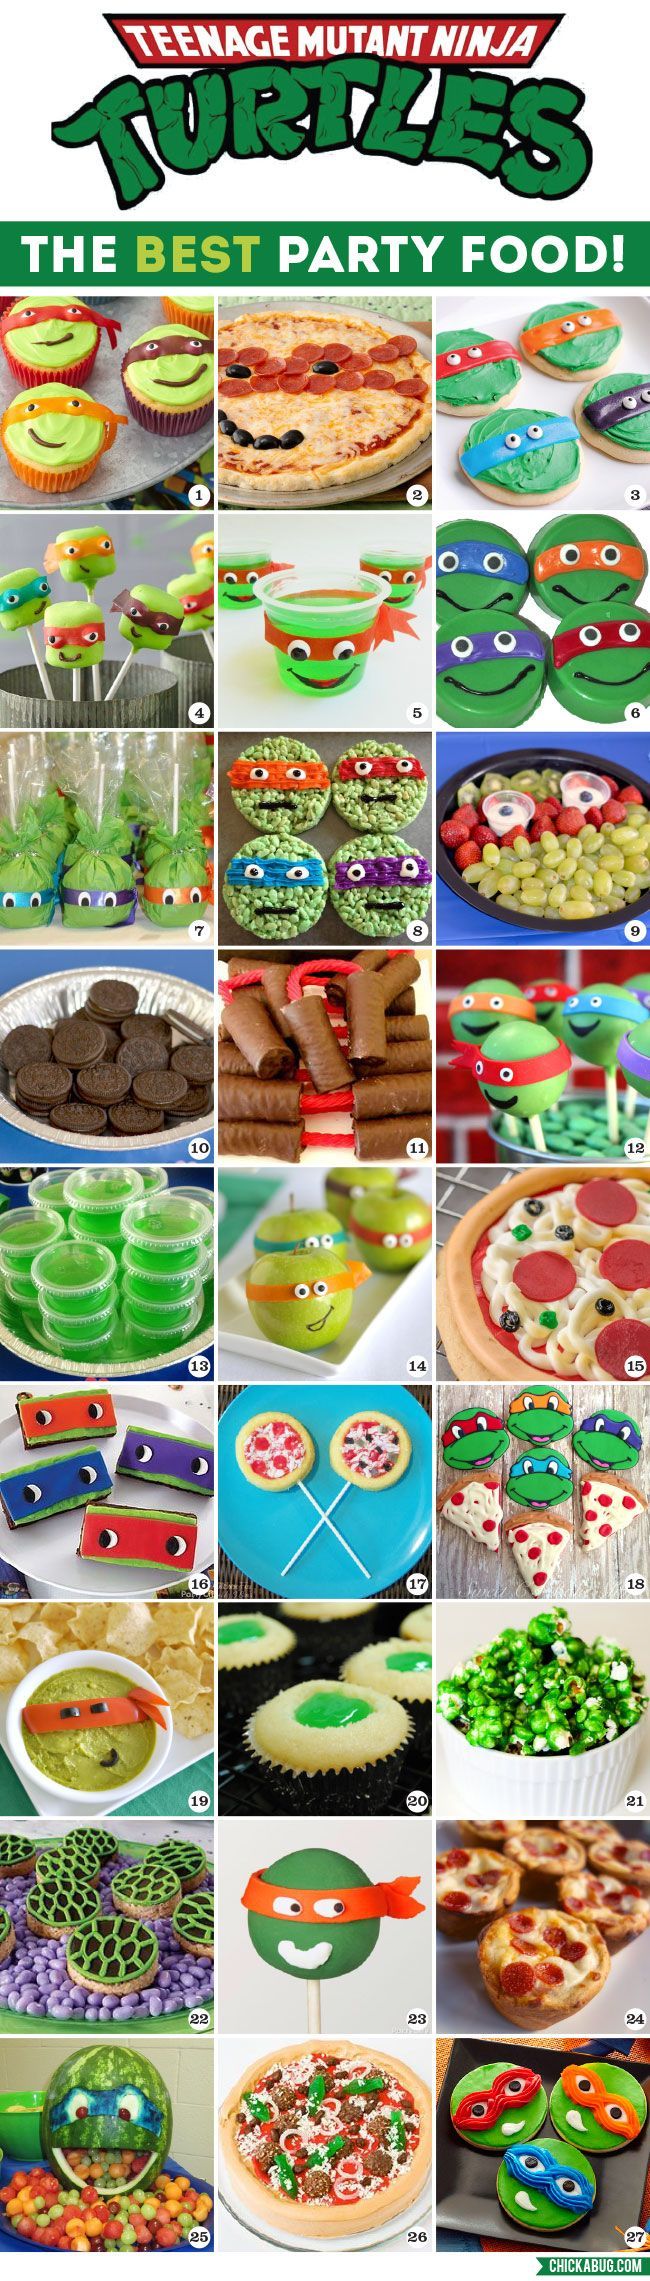 All the BEST Teenage Mutant Ninja Turtles party food ideas, together in one place! This makes party planning so easy!! #TMNT